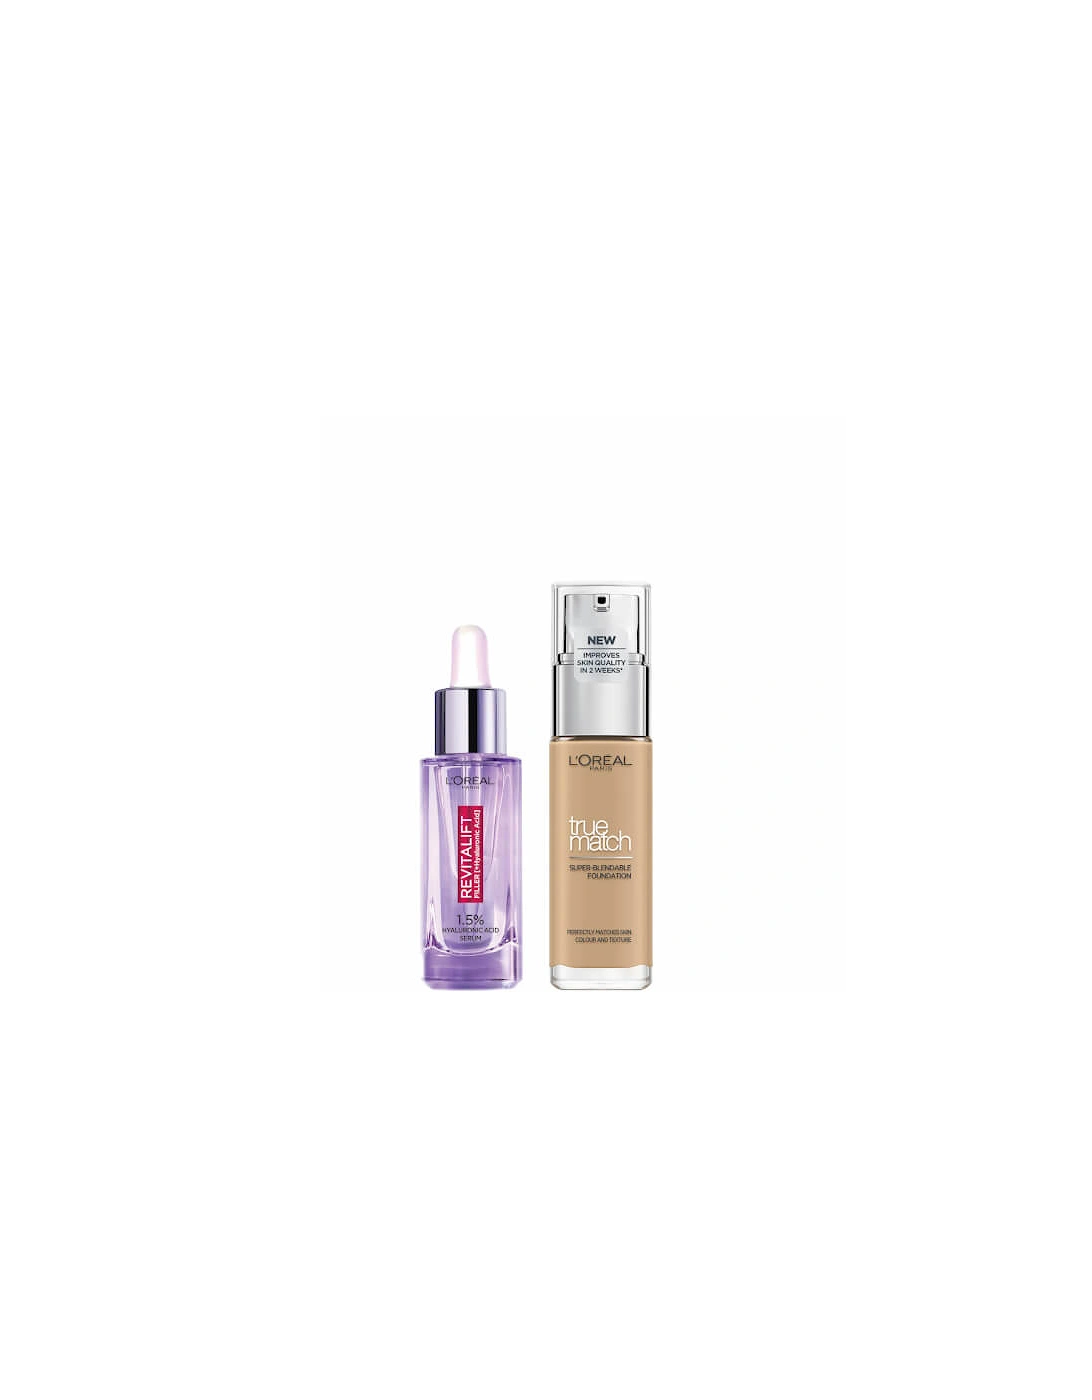 L’Oreal Paris Hyaluronic Acid Filler Serum and True Match Hyaluronic Acid Foundation Duo - 3.5N Peach, 2 of 1